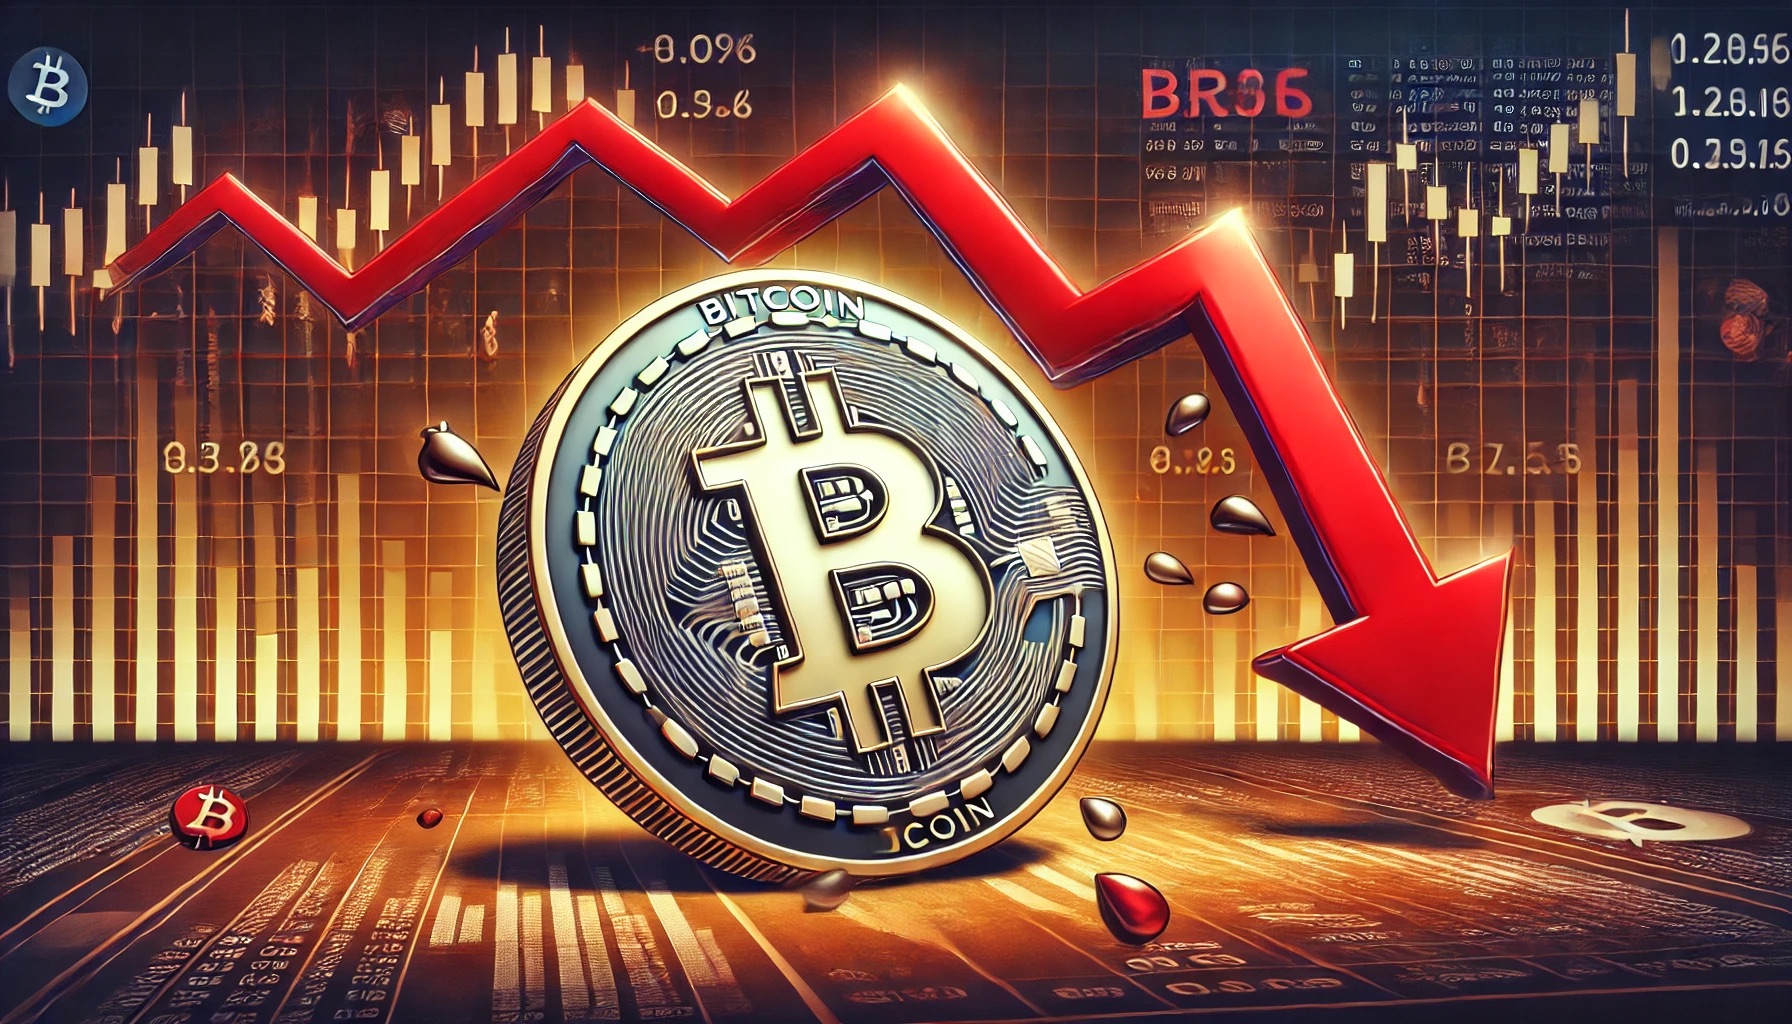 Why Is The Bitcoin Price Down Today?